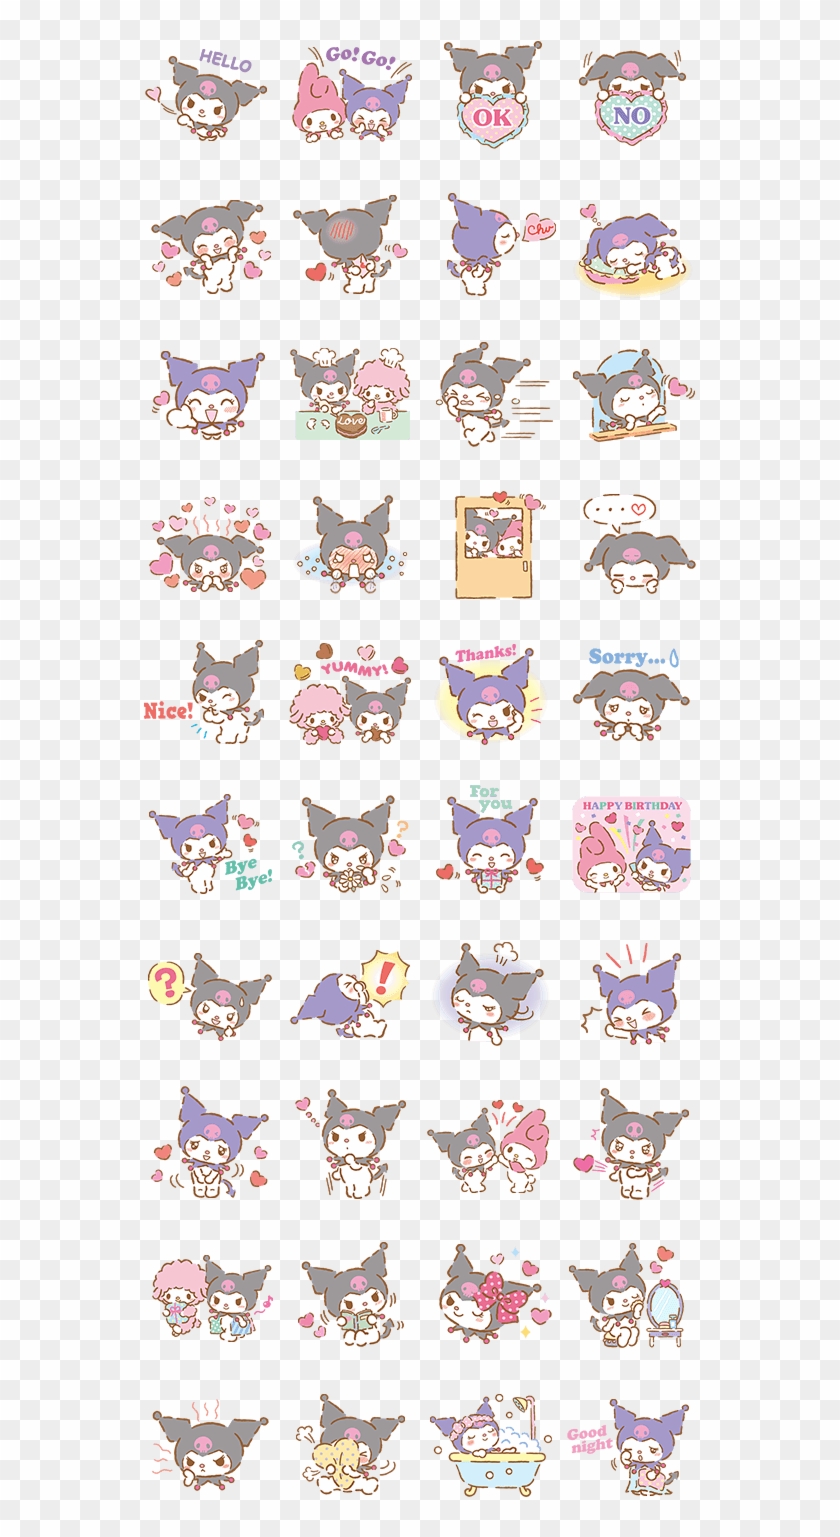 Unnamed File - We Love Kuromi Stickers Line Clipart #4084817